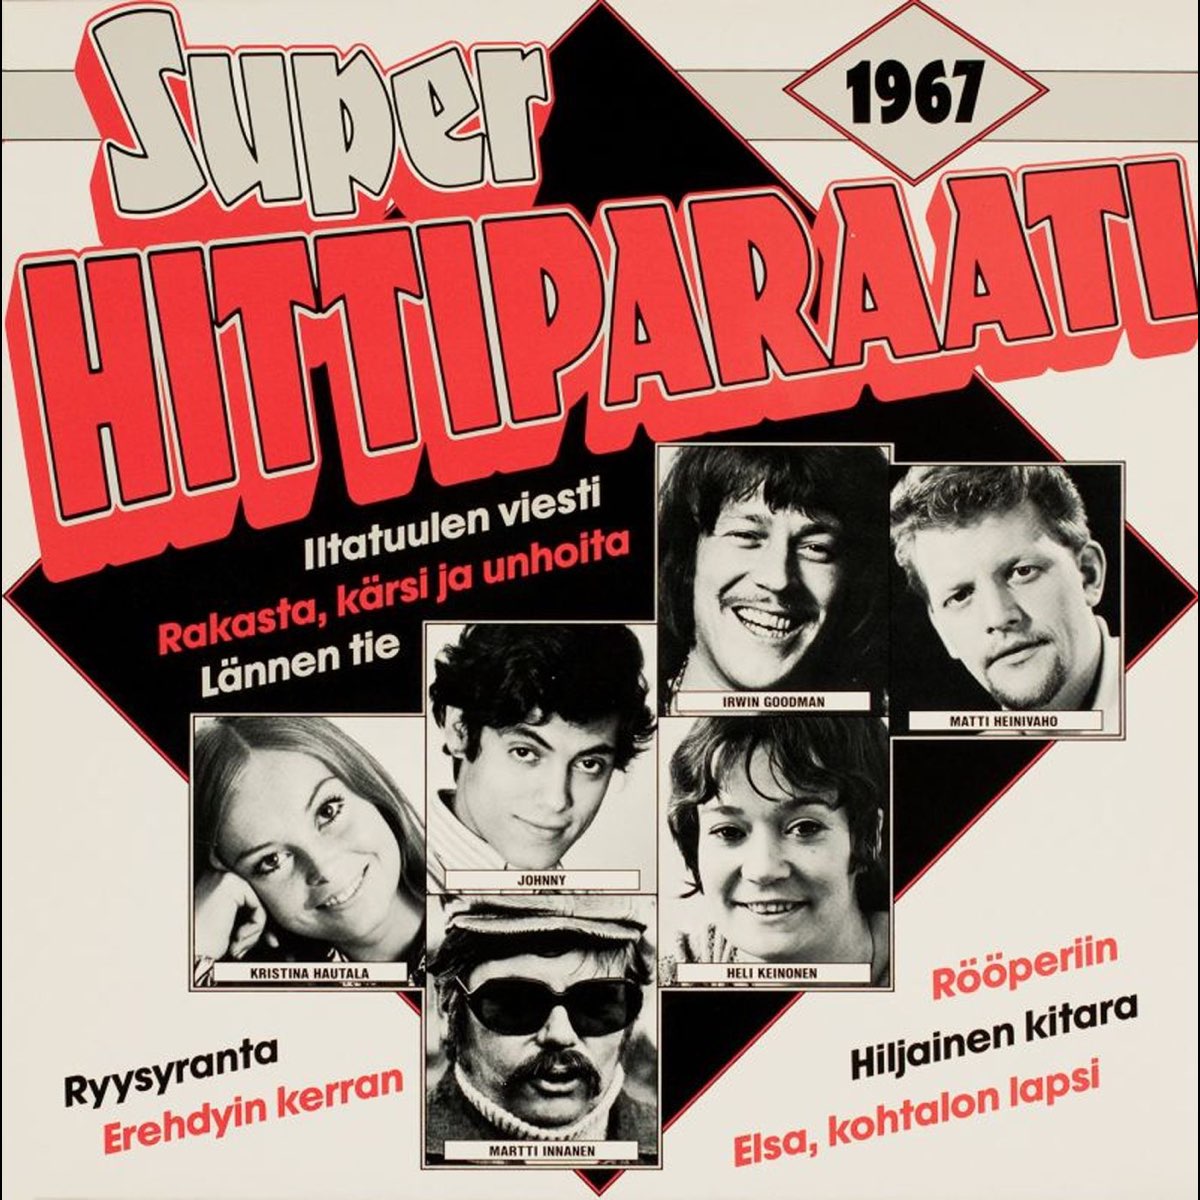 Superhittiparaati 1967 - Album by Various Artists - Apple Music